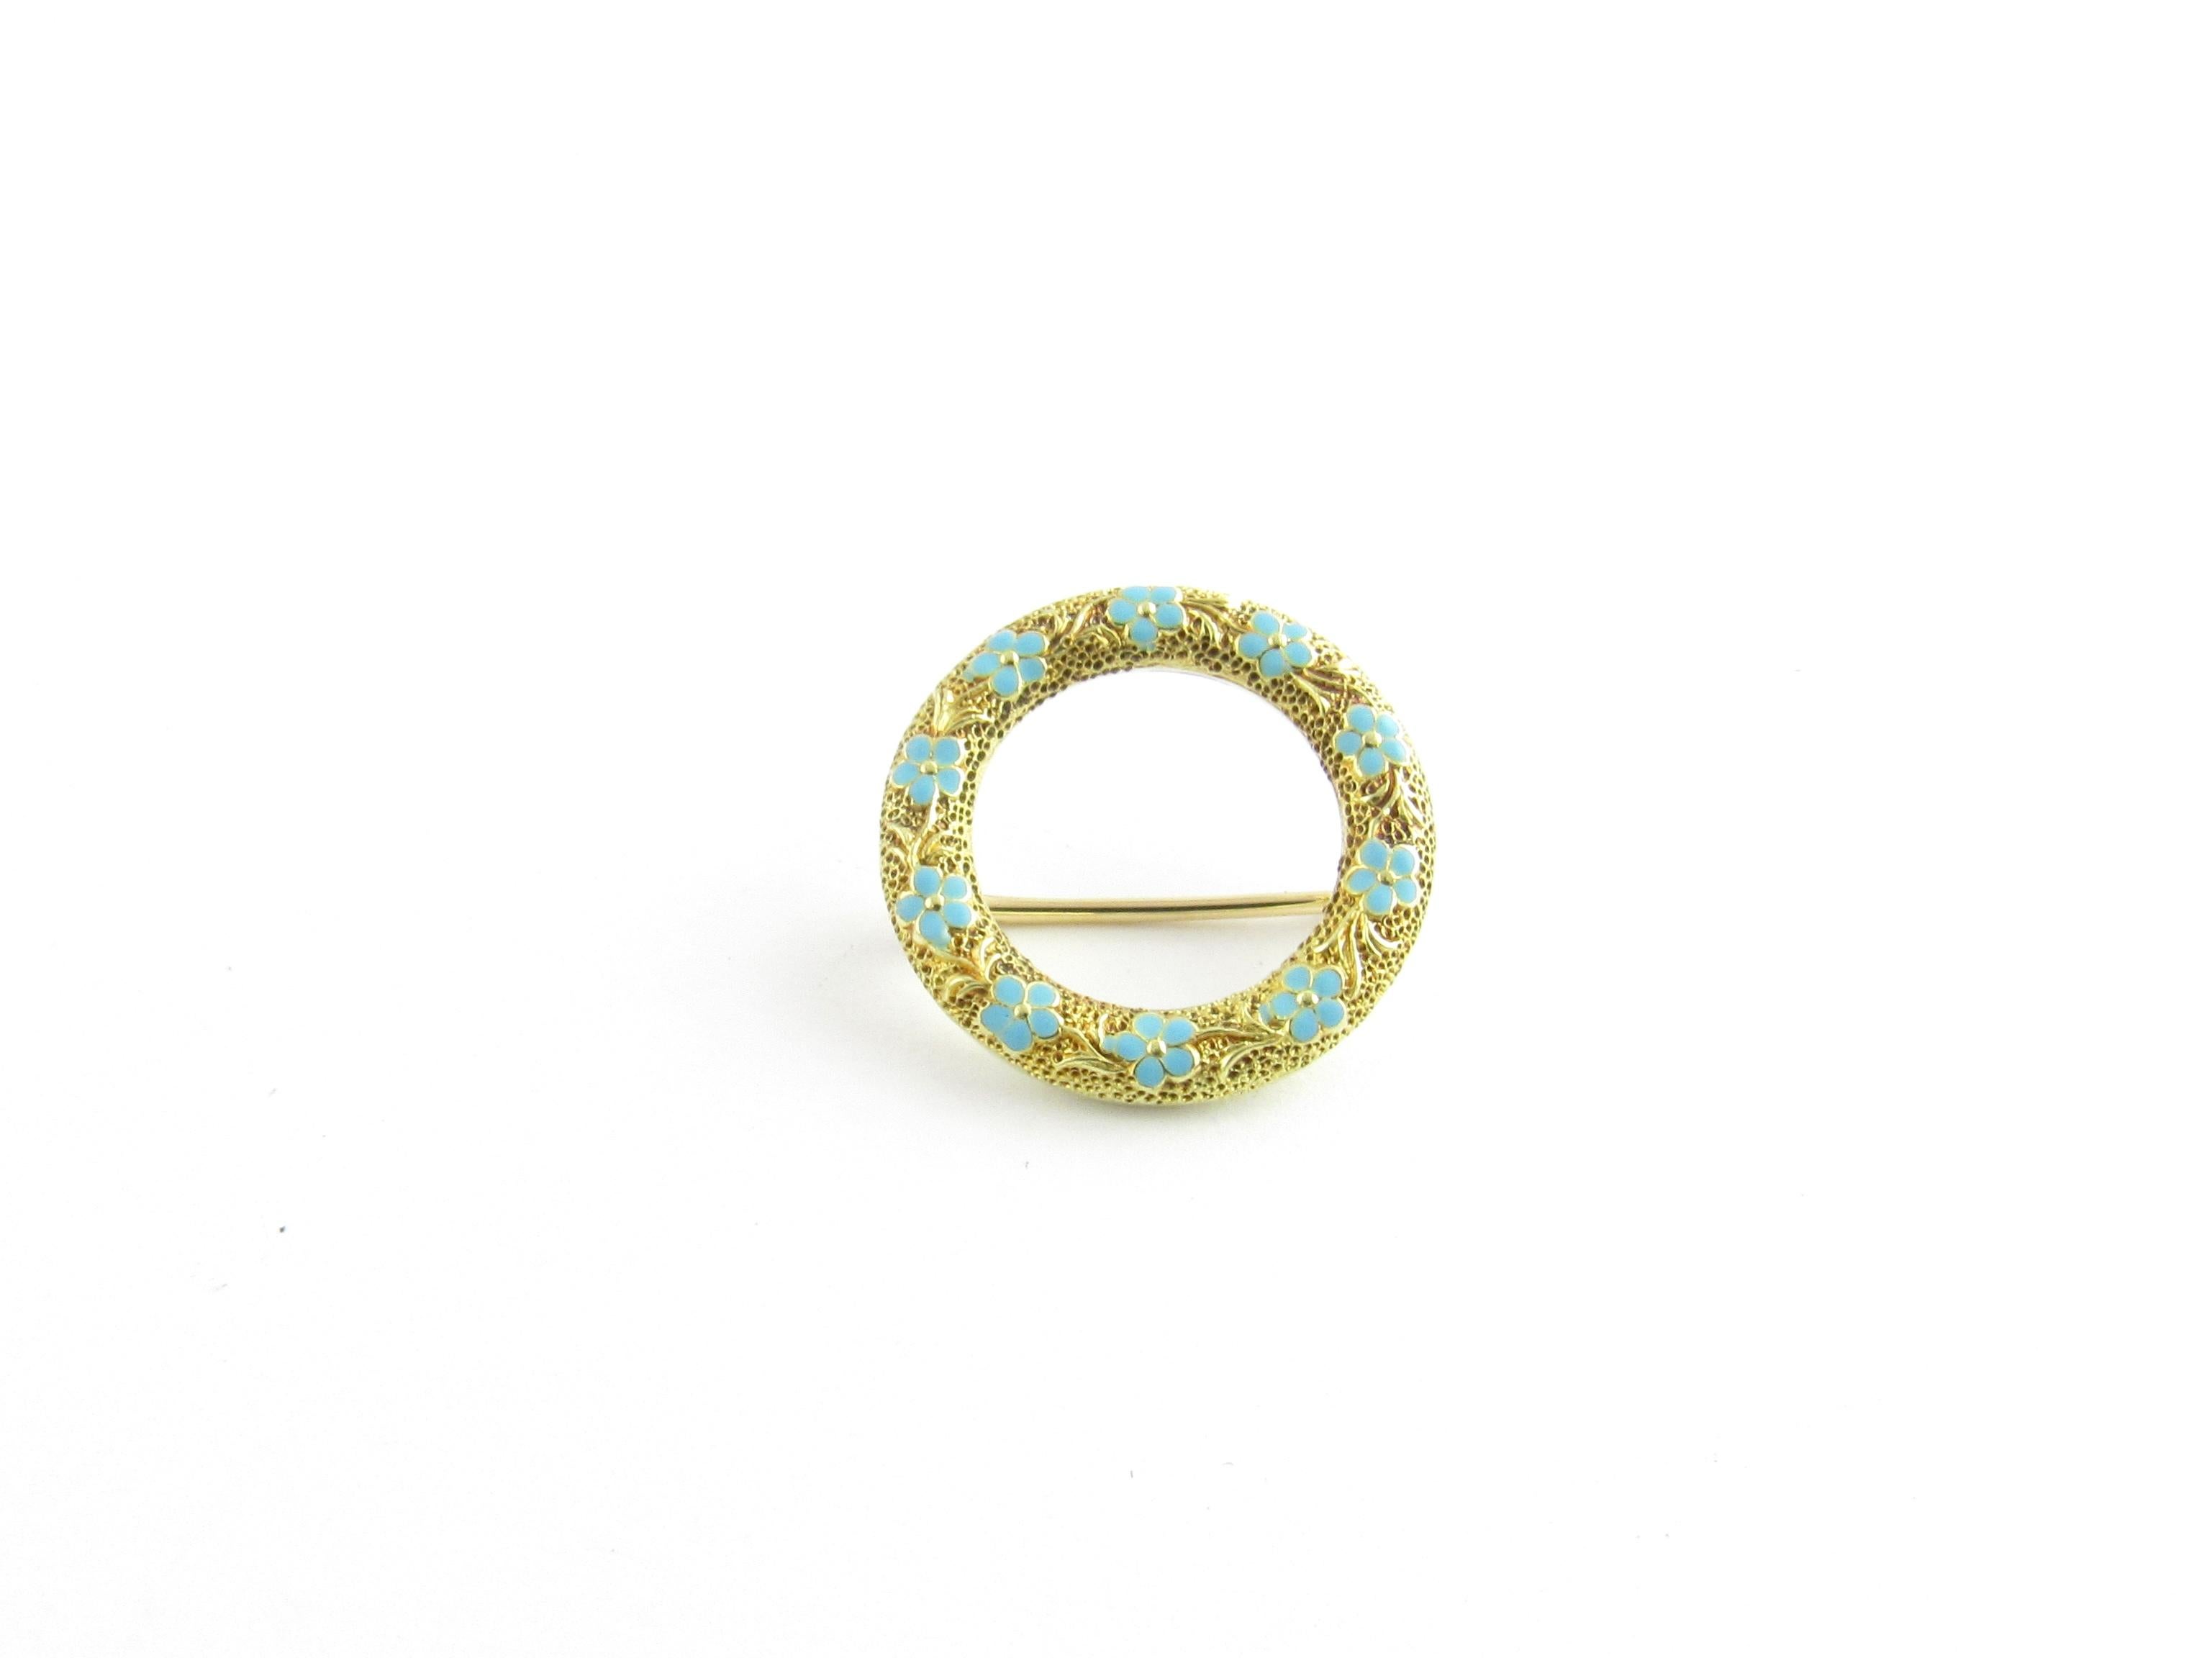 Vintage 14 Karat Yellow Gold and Enamel Floral Circle Pin / Brooch

This elegant brooch features delicate blue enamel forget-me-nots crafted in beautifully detailed 14K yellow gold.

Size: 18 mm

Weight: 1.0 dwt. / 1.6 gr.

Stamped: 14K

Very good